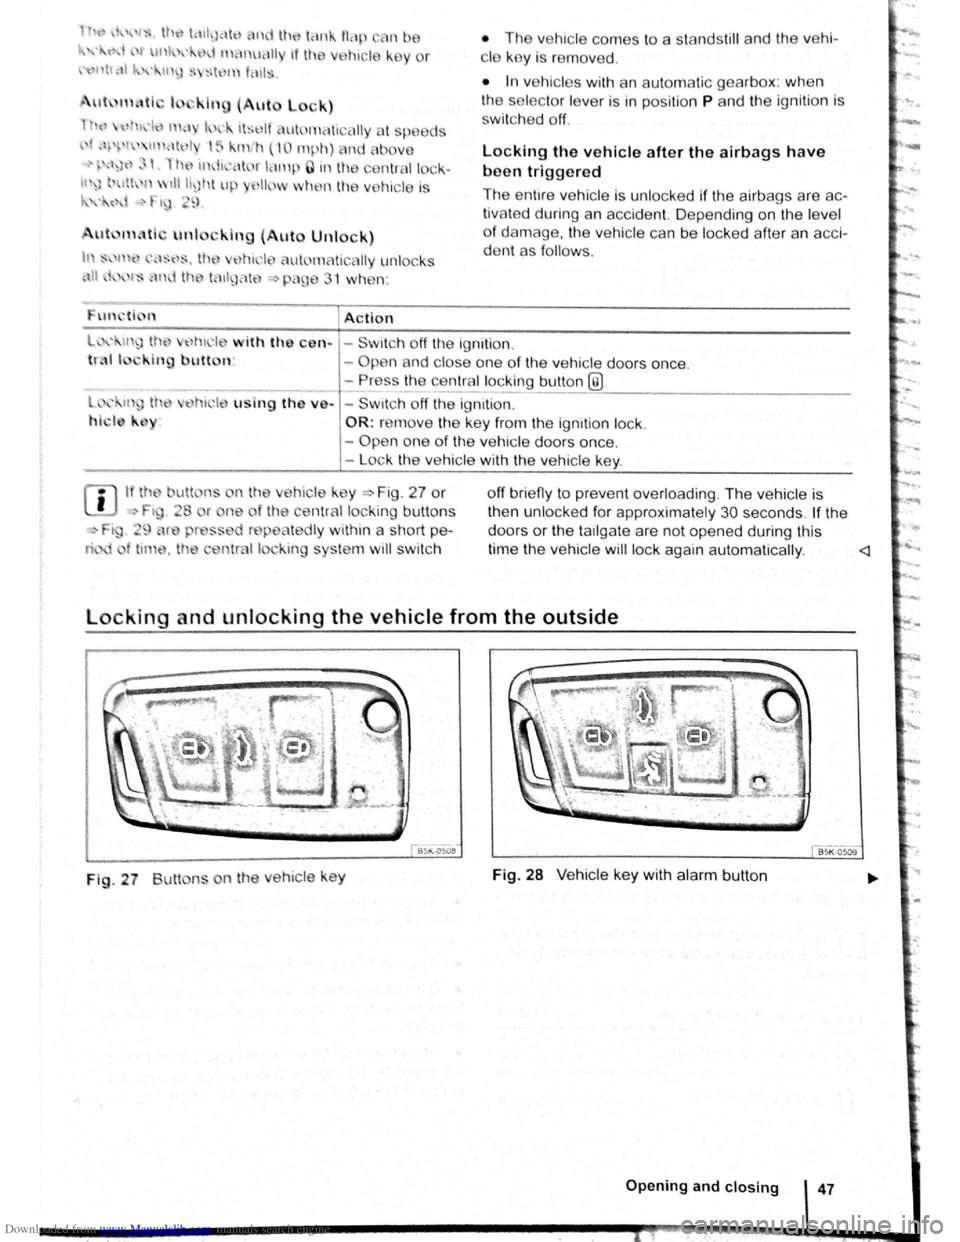 VOLKSWAGEN BEETLE 2010  Owners Manual Downloaded from www.Manualslib.com manuals search engine  h{ ,~ I,. U rl lC1tlJclt nd th tank flap cnn  be 
·  r 1 unhx I n tFinuHII if th e ve hic le k e y or 
"'~' tf,\1 1-. • "J